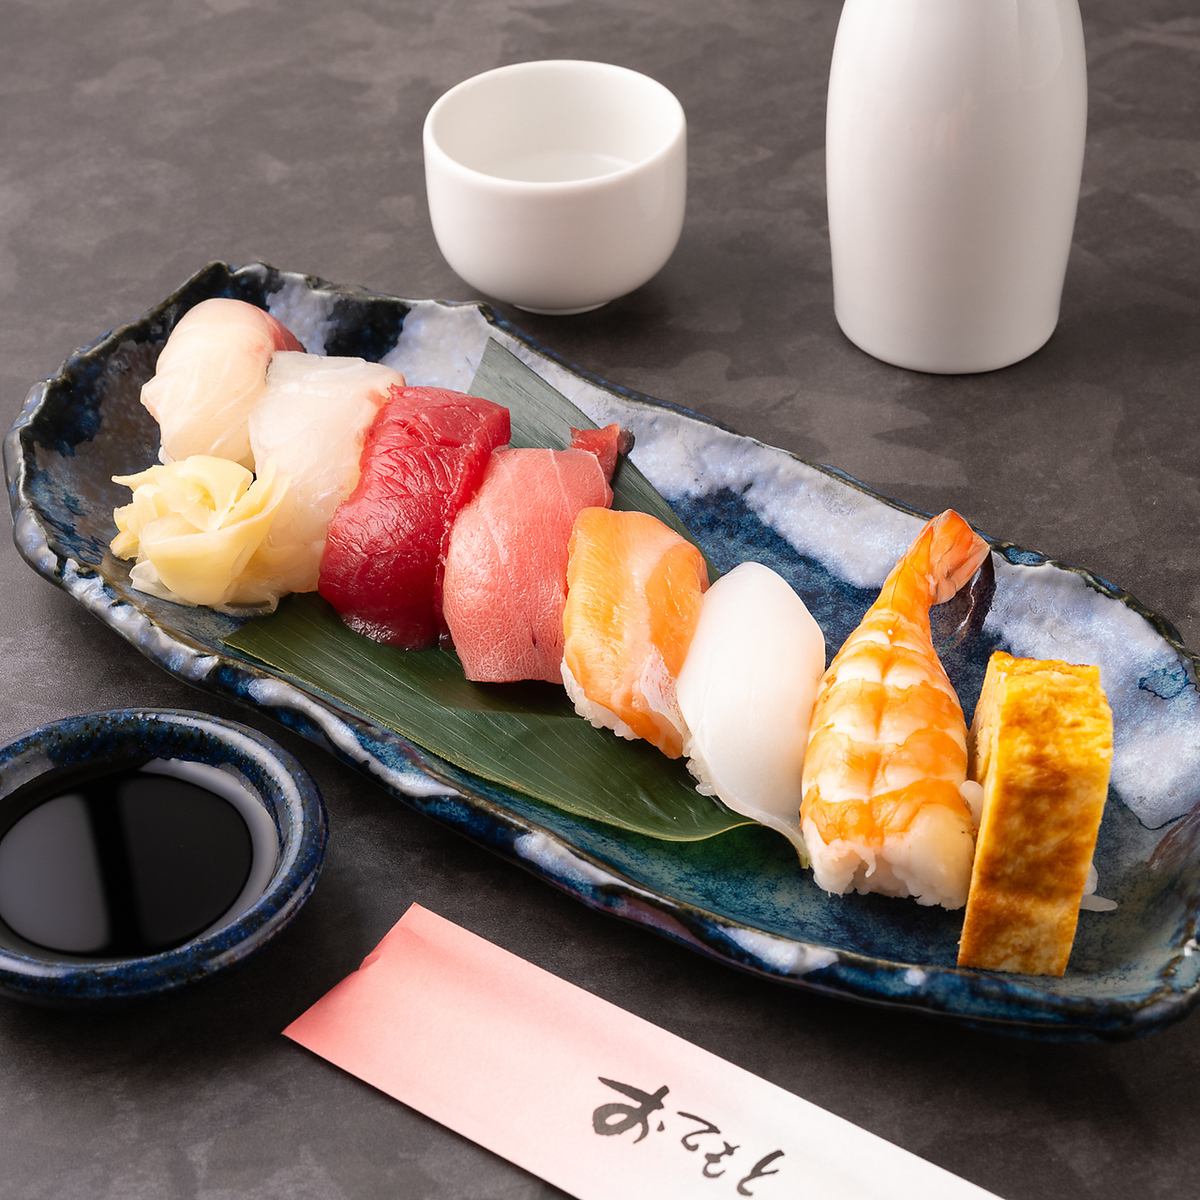 Enjoy a luxurious lunch unique to sushi chefs!